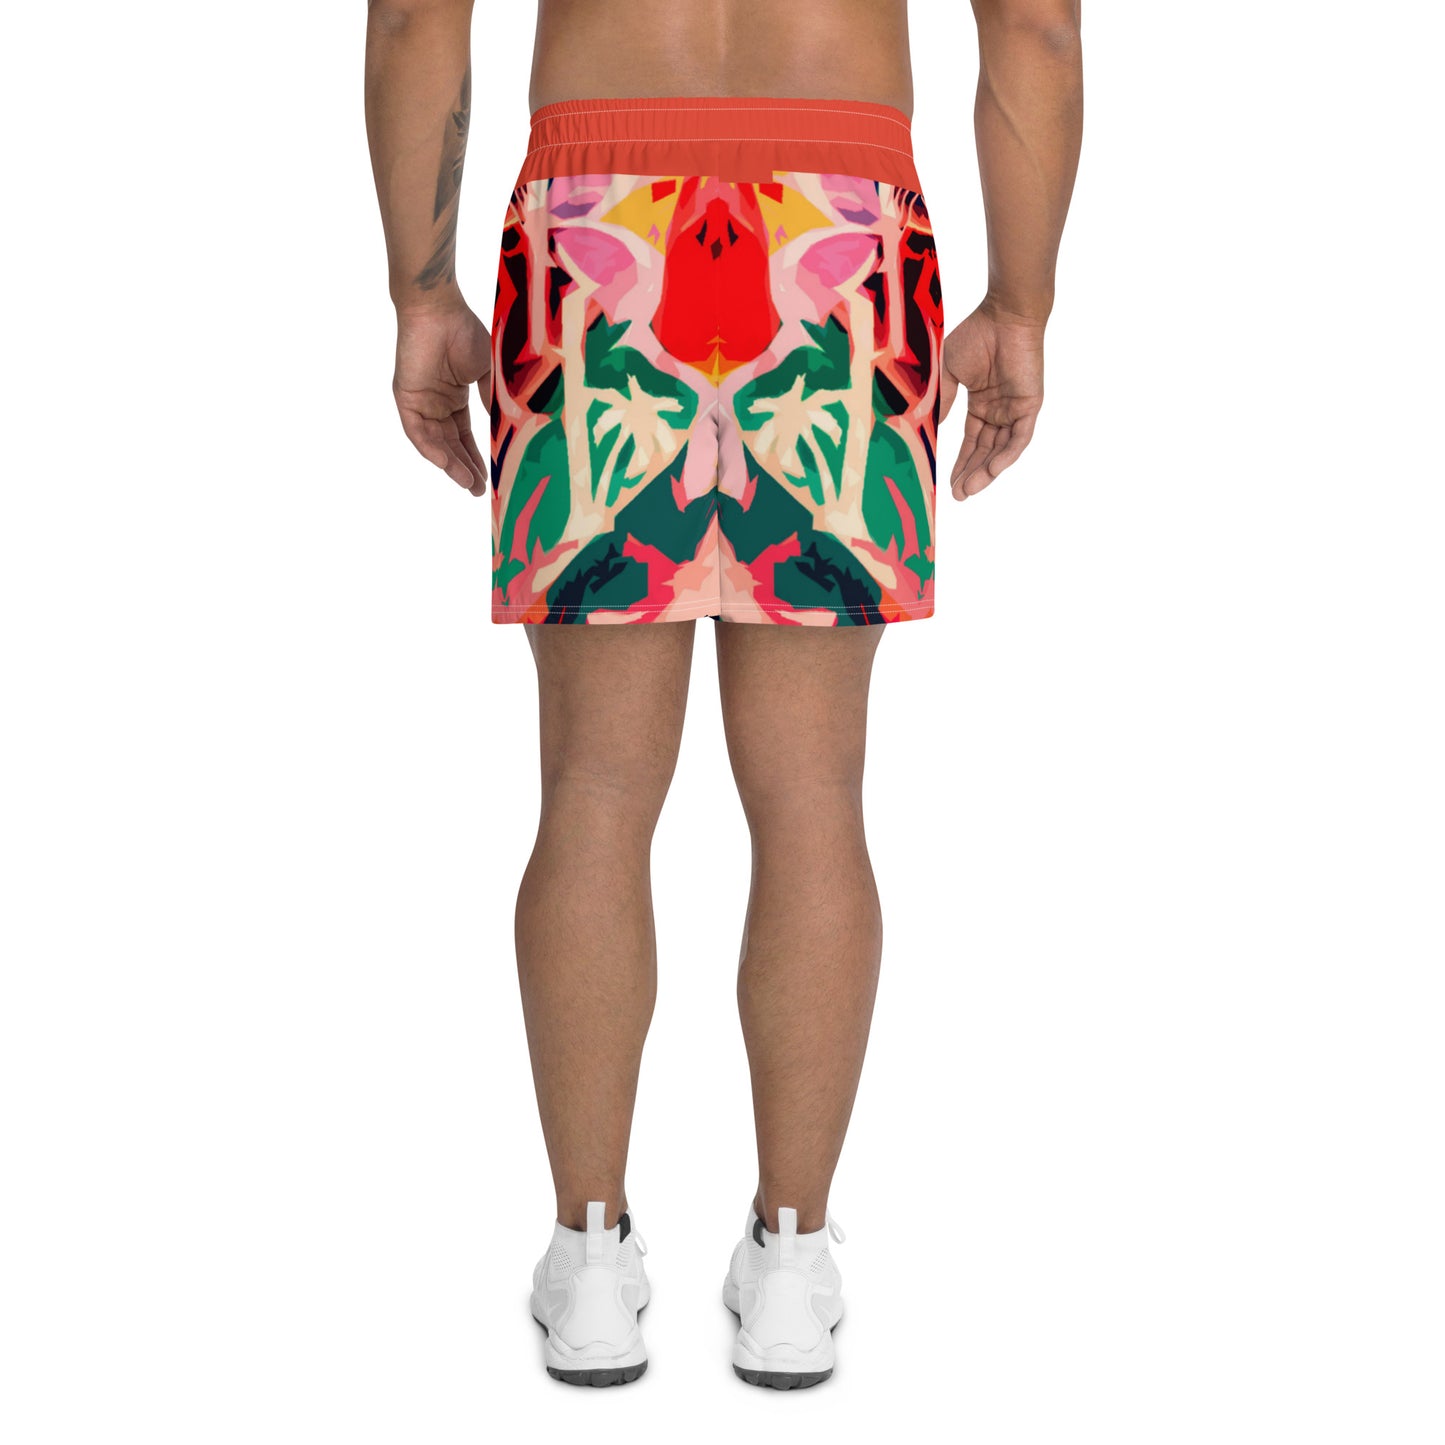 "August Tuesday" Athletic Shorts